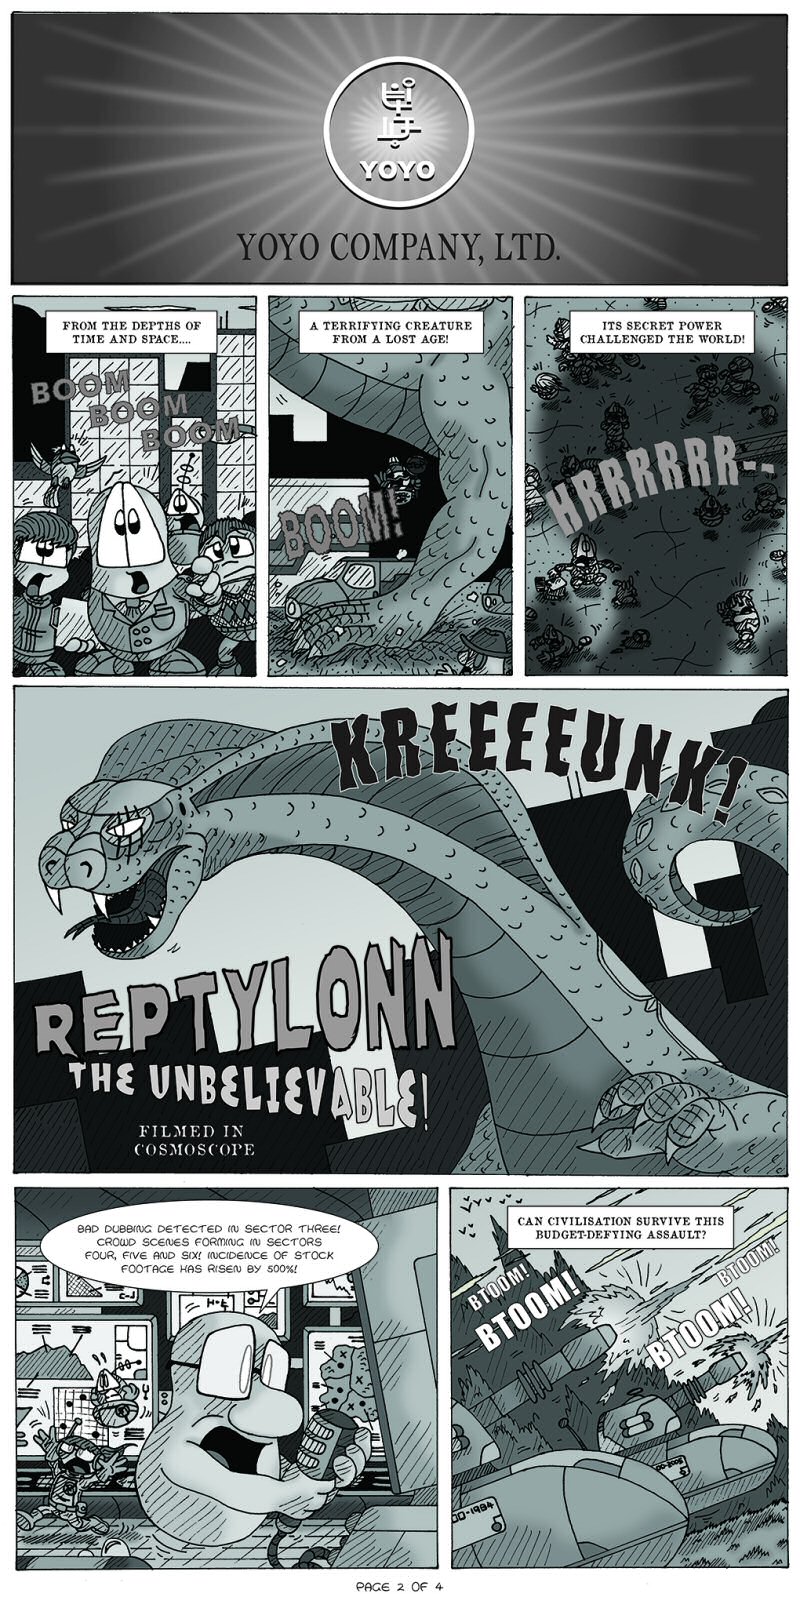 Serpents of Old Page 2 by  Cartoonist_at_Large